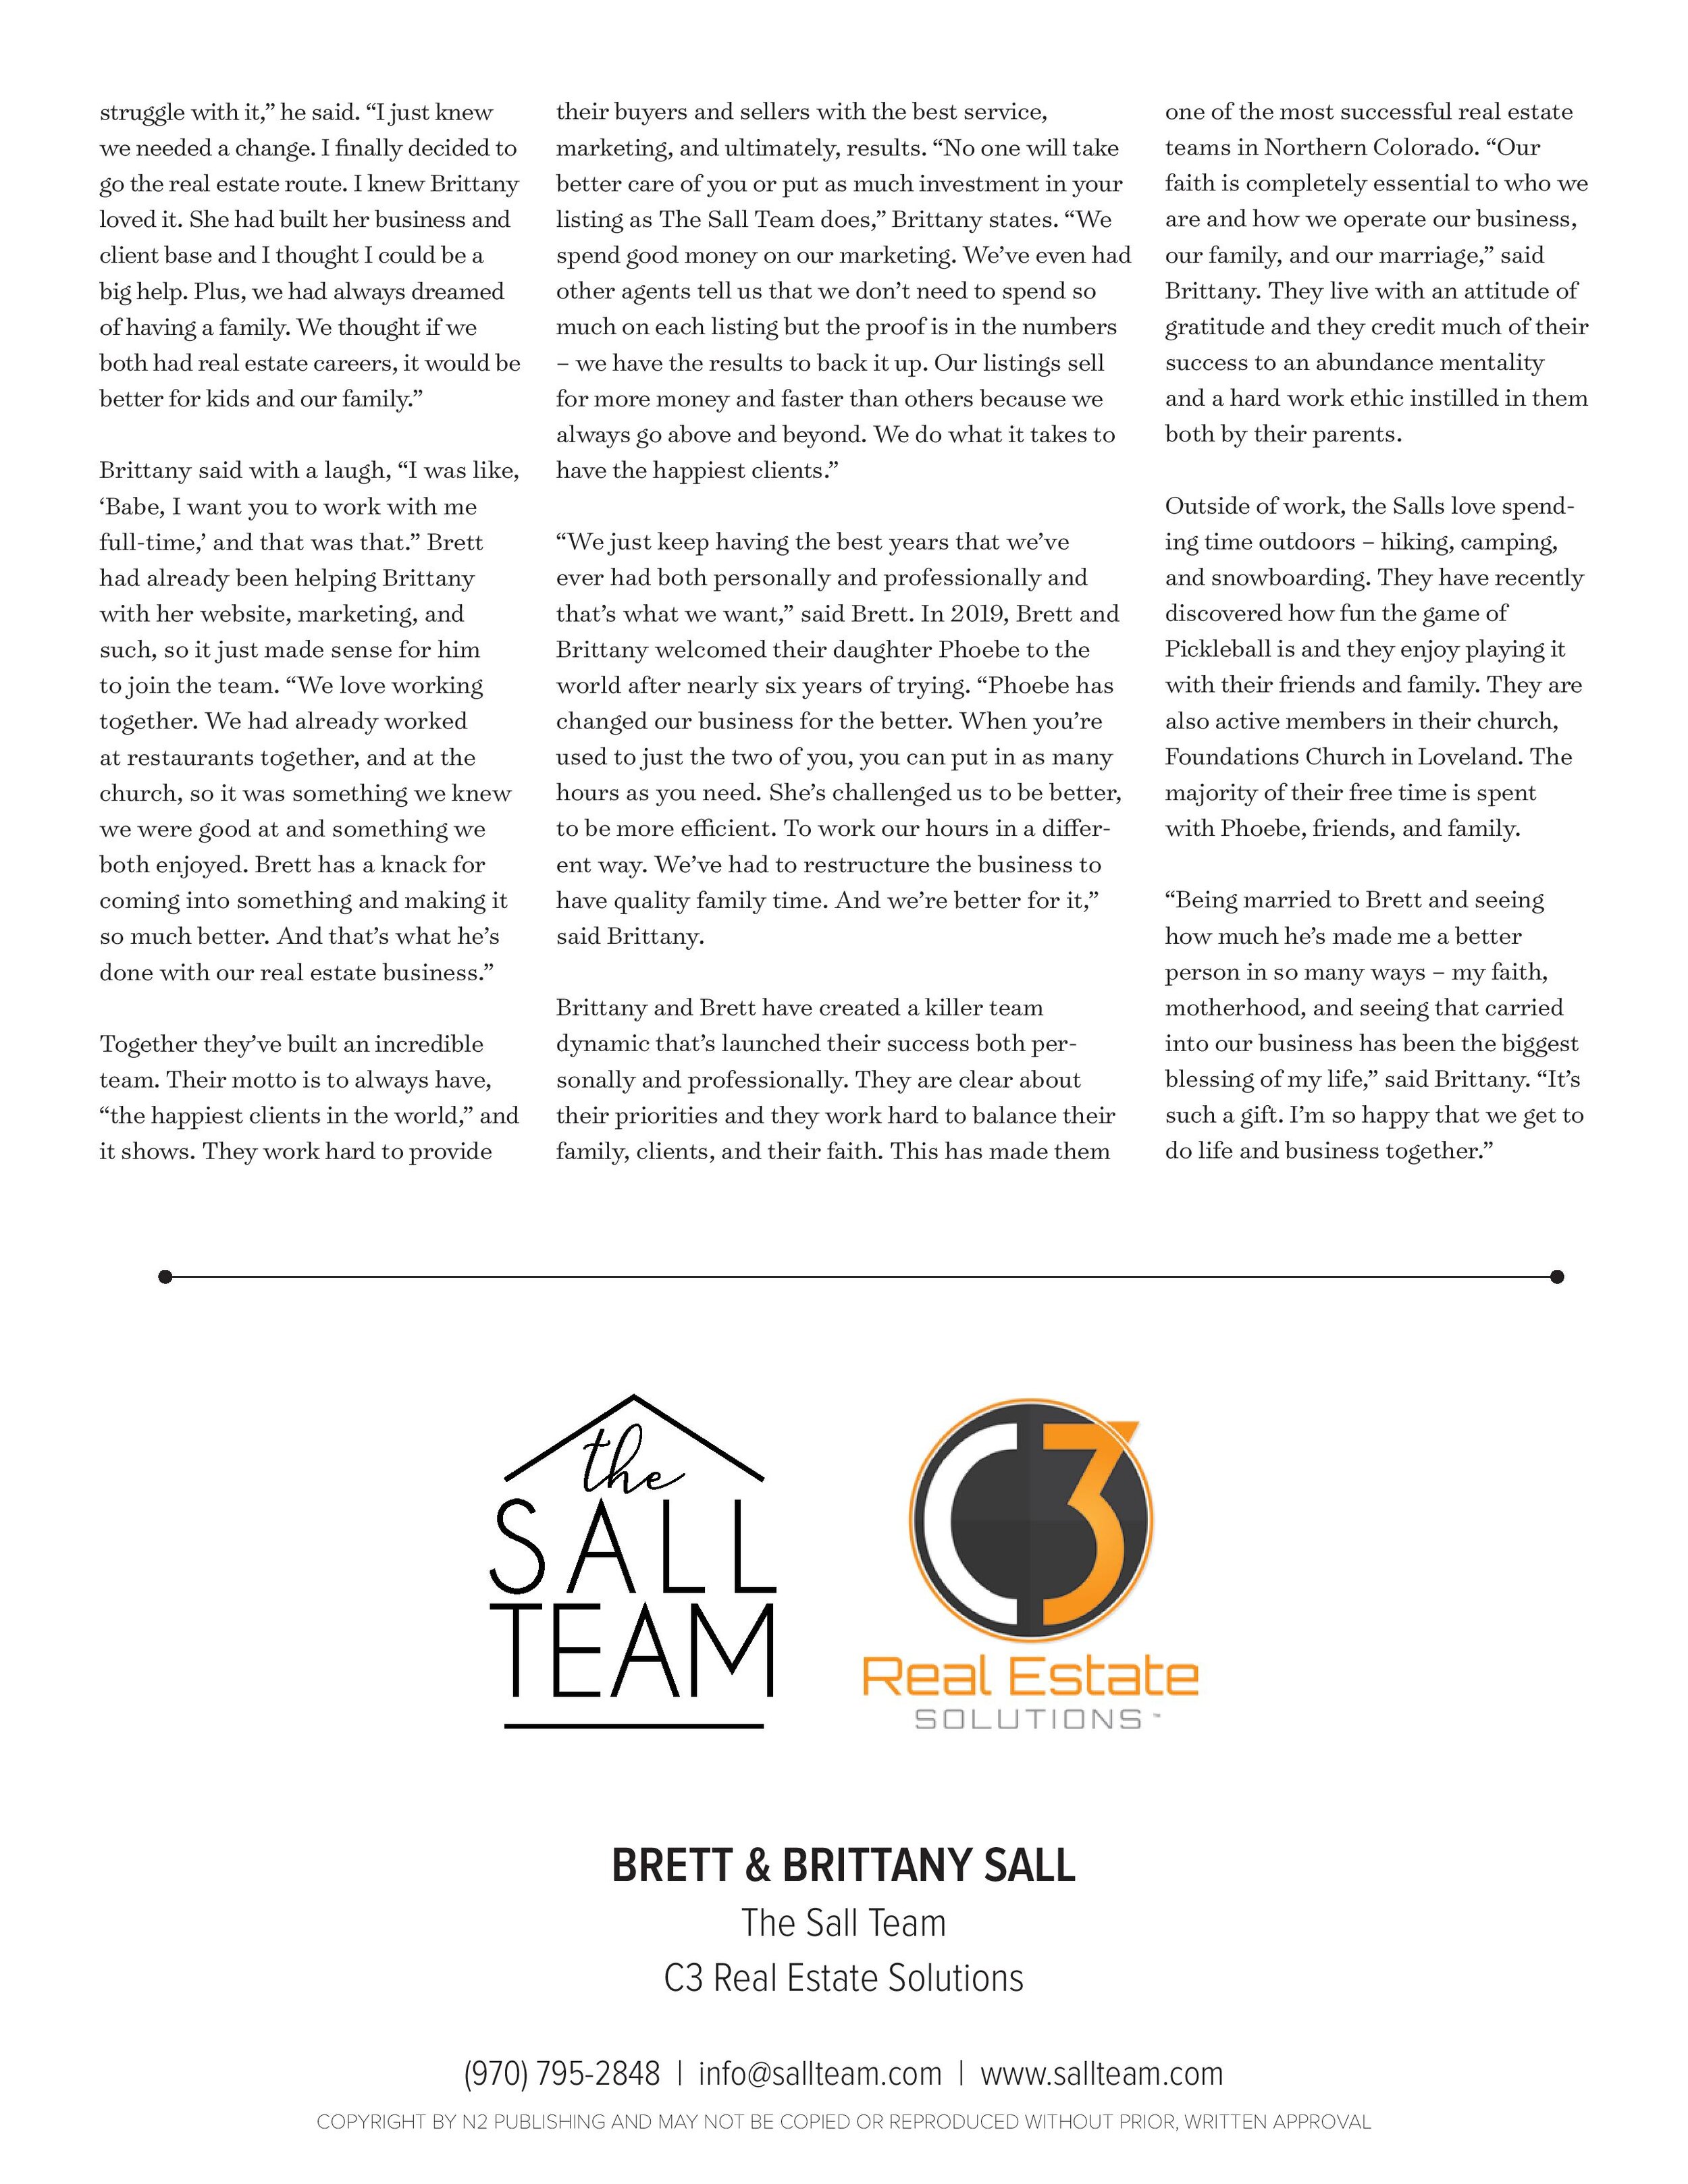 Web NOCO Real Producers The Sall Team-page-004.jpg